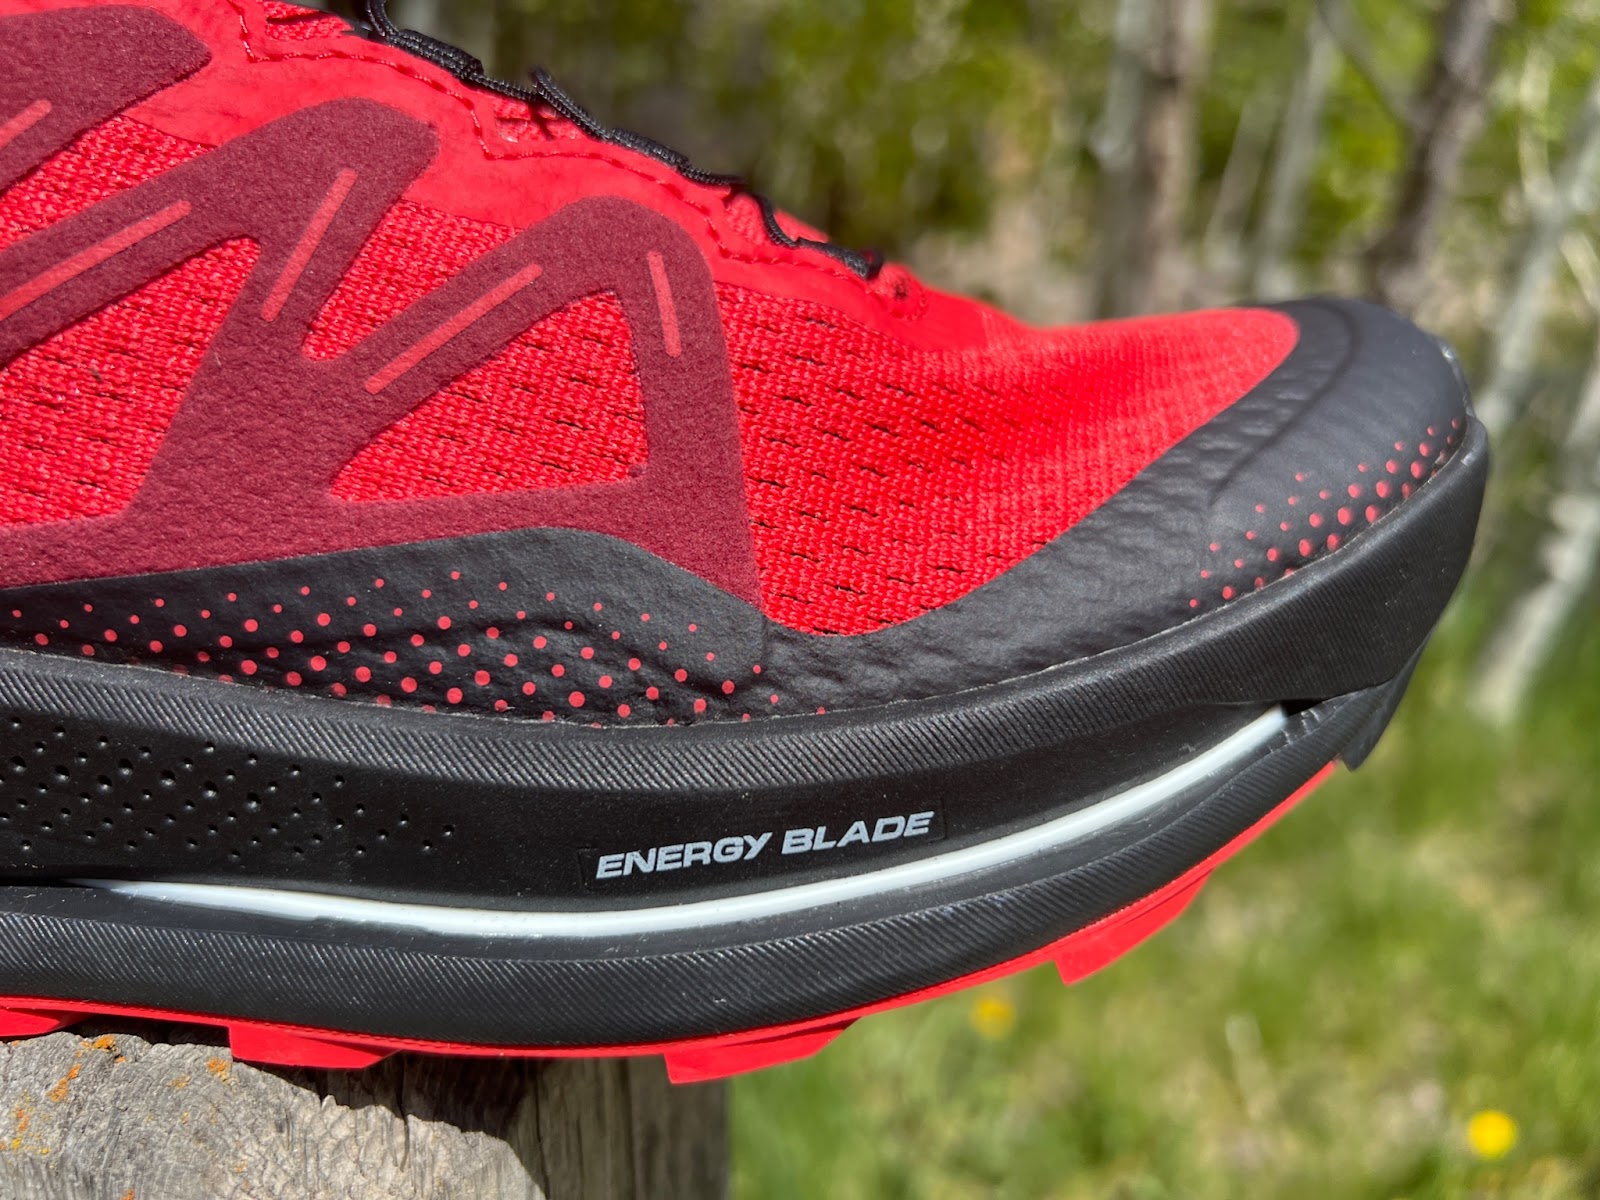 Bogholder Marvel Addition Road Trail Run: Salomon Pulsar Trail Review: The New Salomon! Plated,  Protective, Deeply Cushioned, Fun and Versatile.